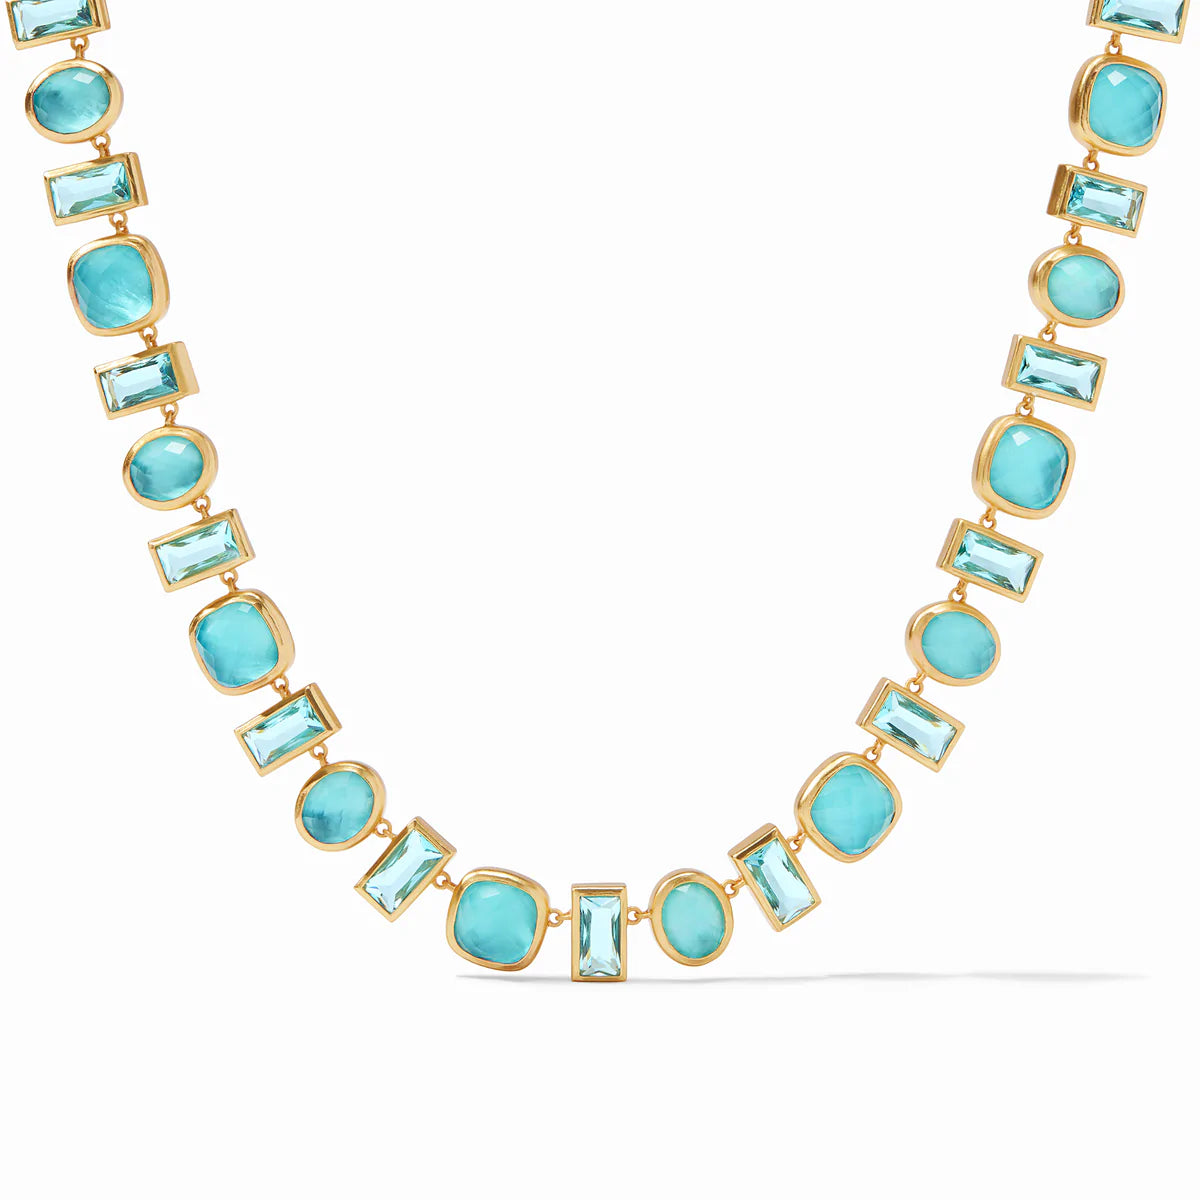 Antonia Tennis Necklace Iridescent Bahamian Blue by Julie Vos features alternating Bahamian blue stones, each framed in gold finish that resembles a paving stone path. Measures 19-19.75 inches. 24K gold plate. Shop at The Painted Cottage in Edgewater, MD.